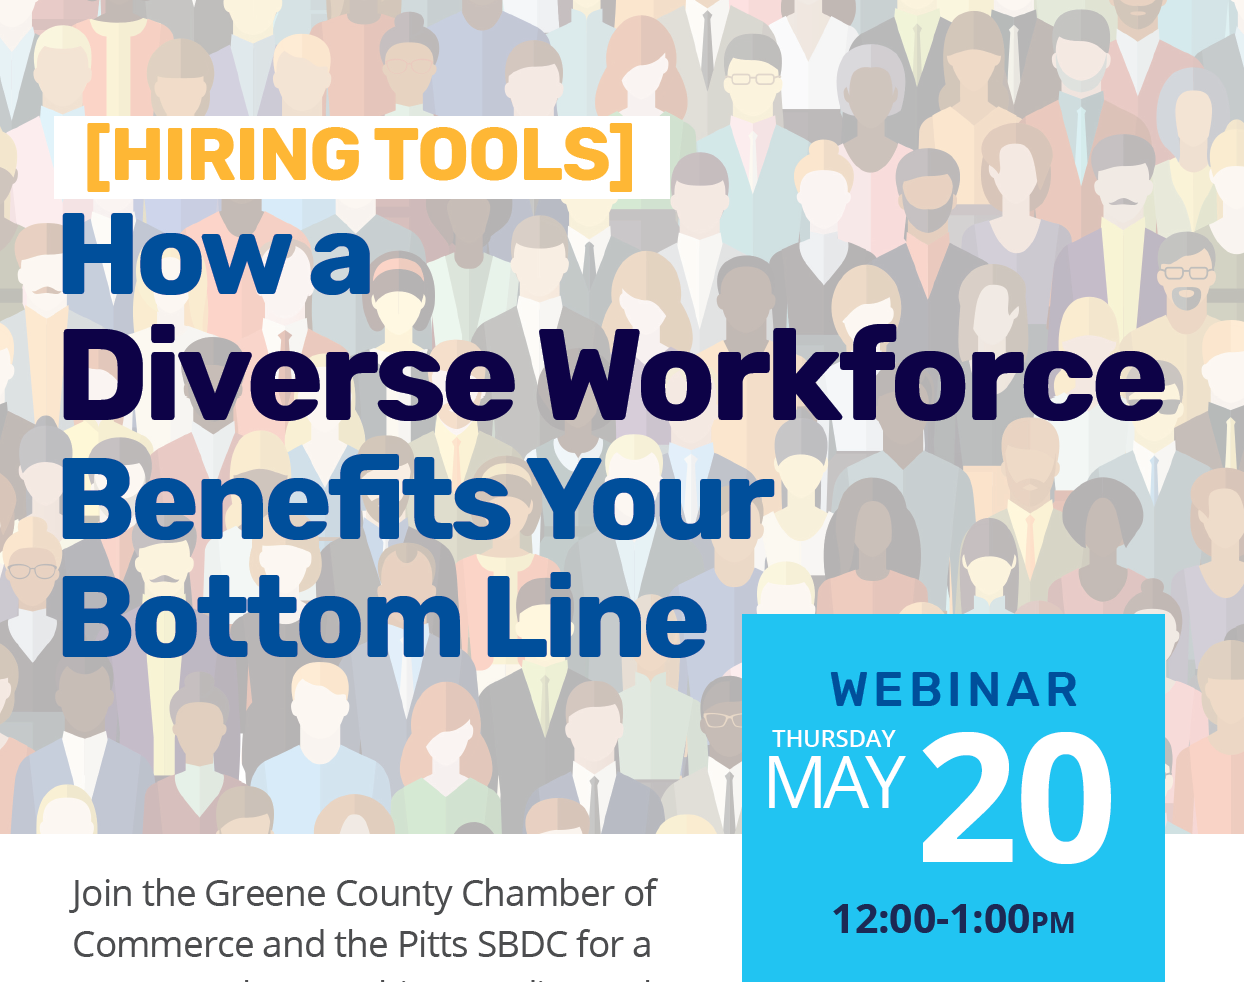 Hiring Tools: How a Diverse Workforce Benefits Your Bottom Line with Greene County Chamber of Commerce and Pitt SBDC